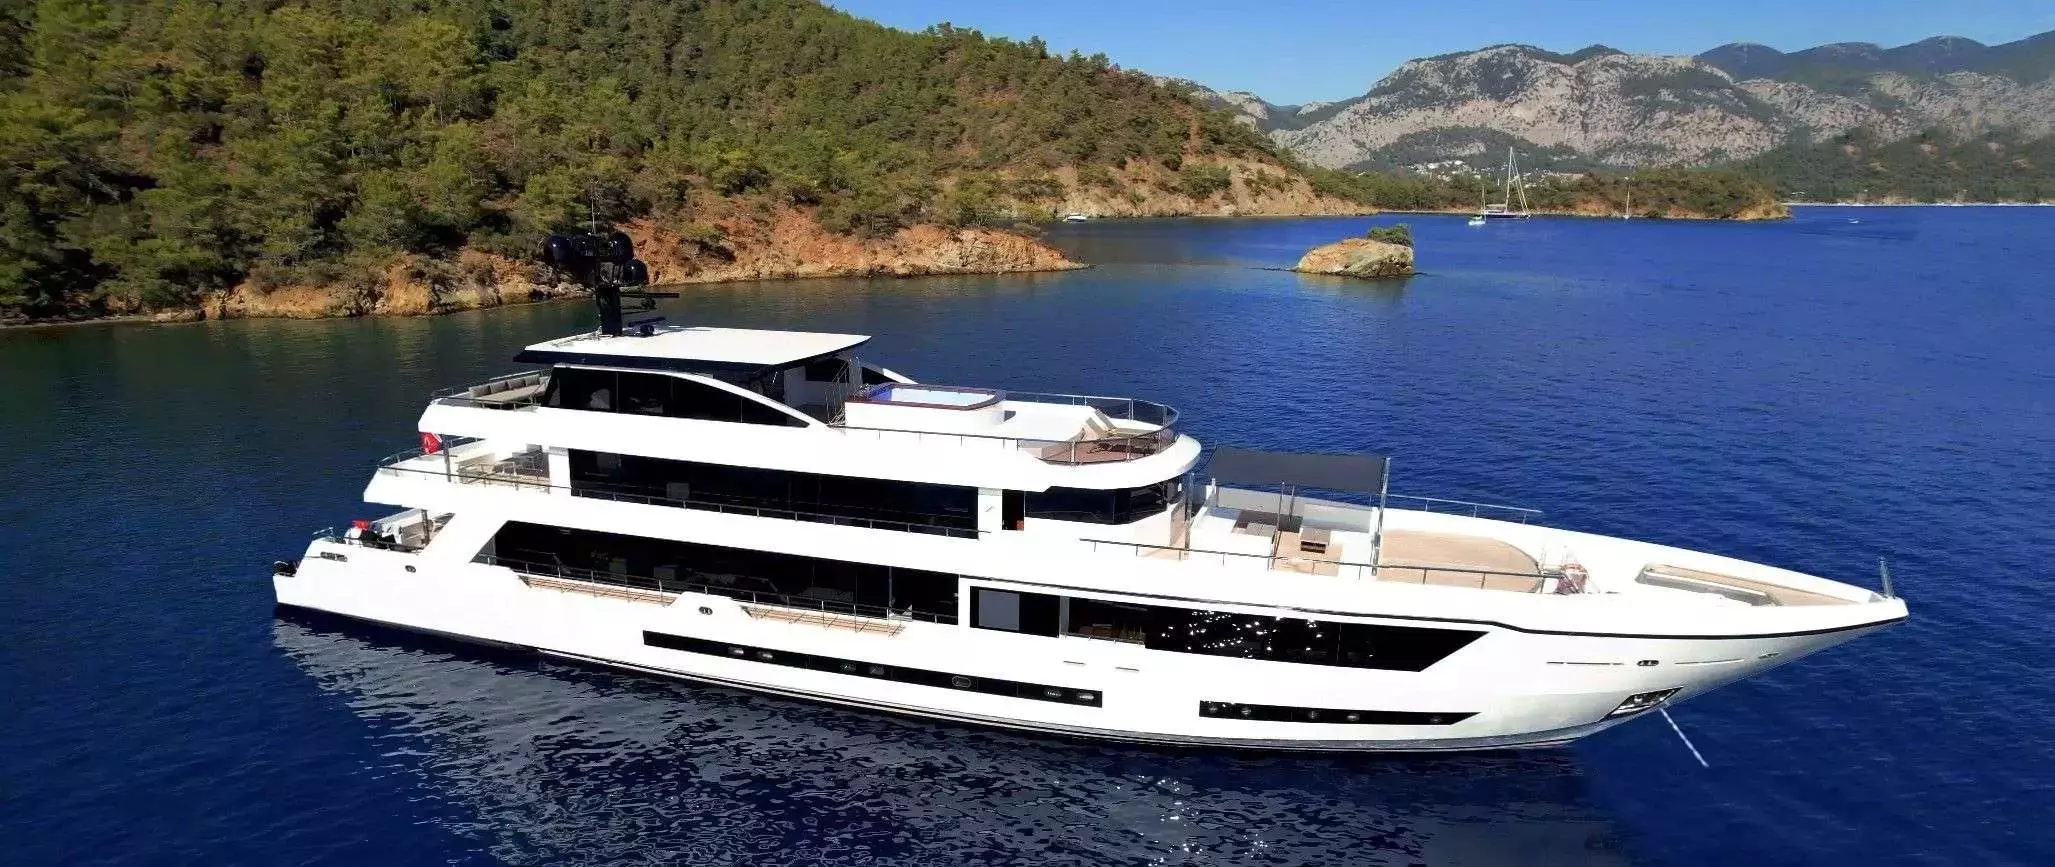 Adamaris by Mengi Yay - Top rates for a Charter of a private Superyacht in Turkey